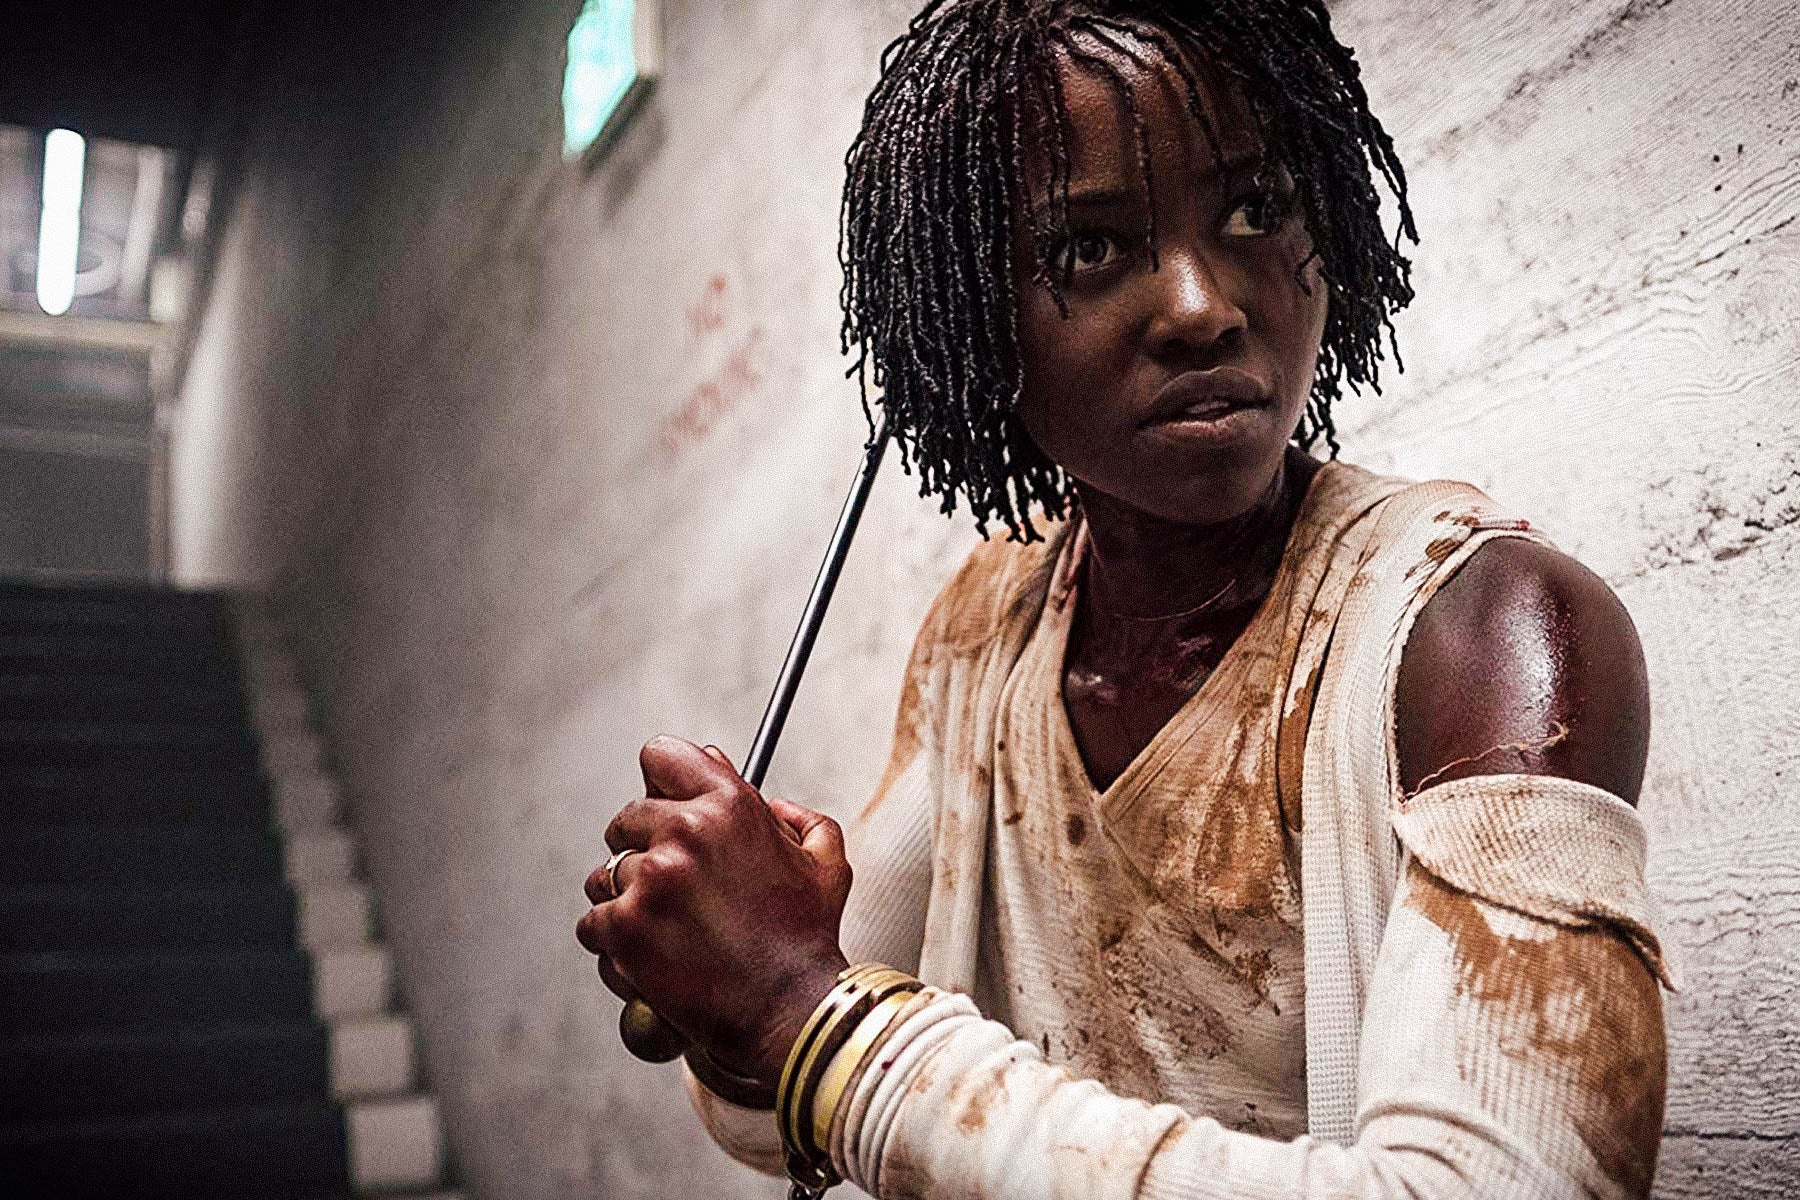 In a still from Us, Lupita Nyong’o stands at the foot of a set of stairs in a deserted hallway. She is wearing dirty clothing and brandishing a metal rod as a weapon.